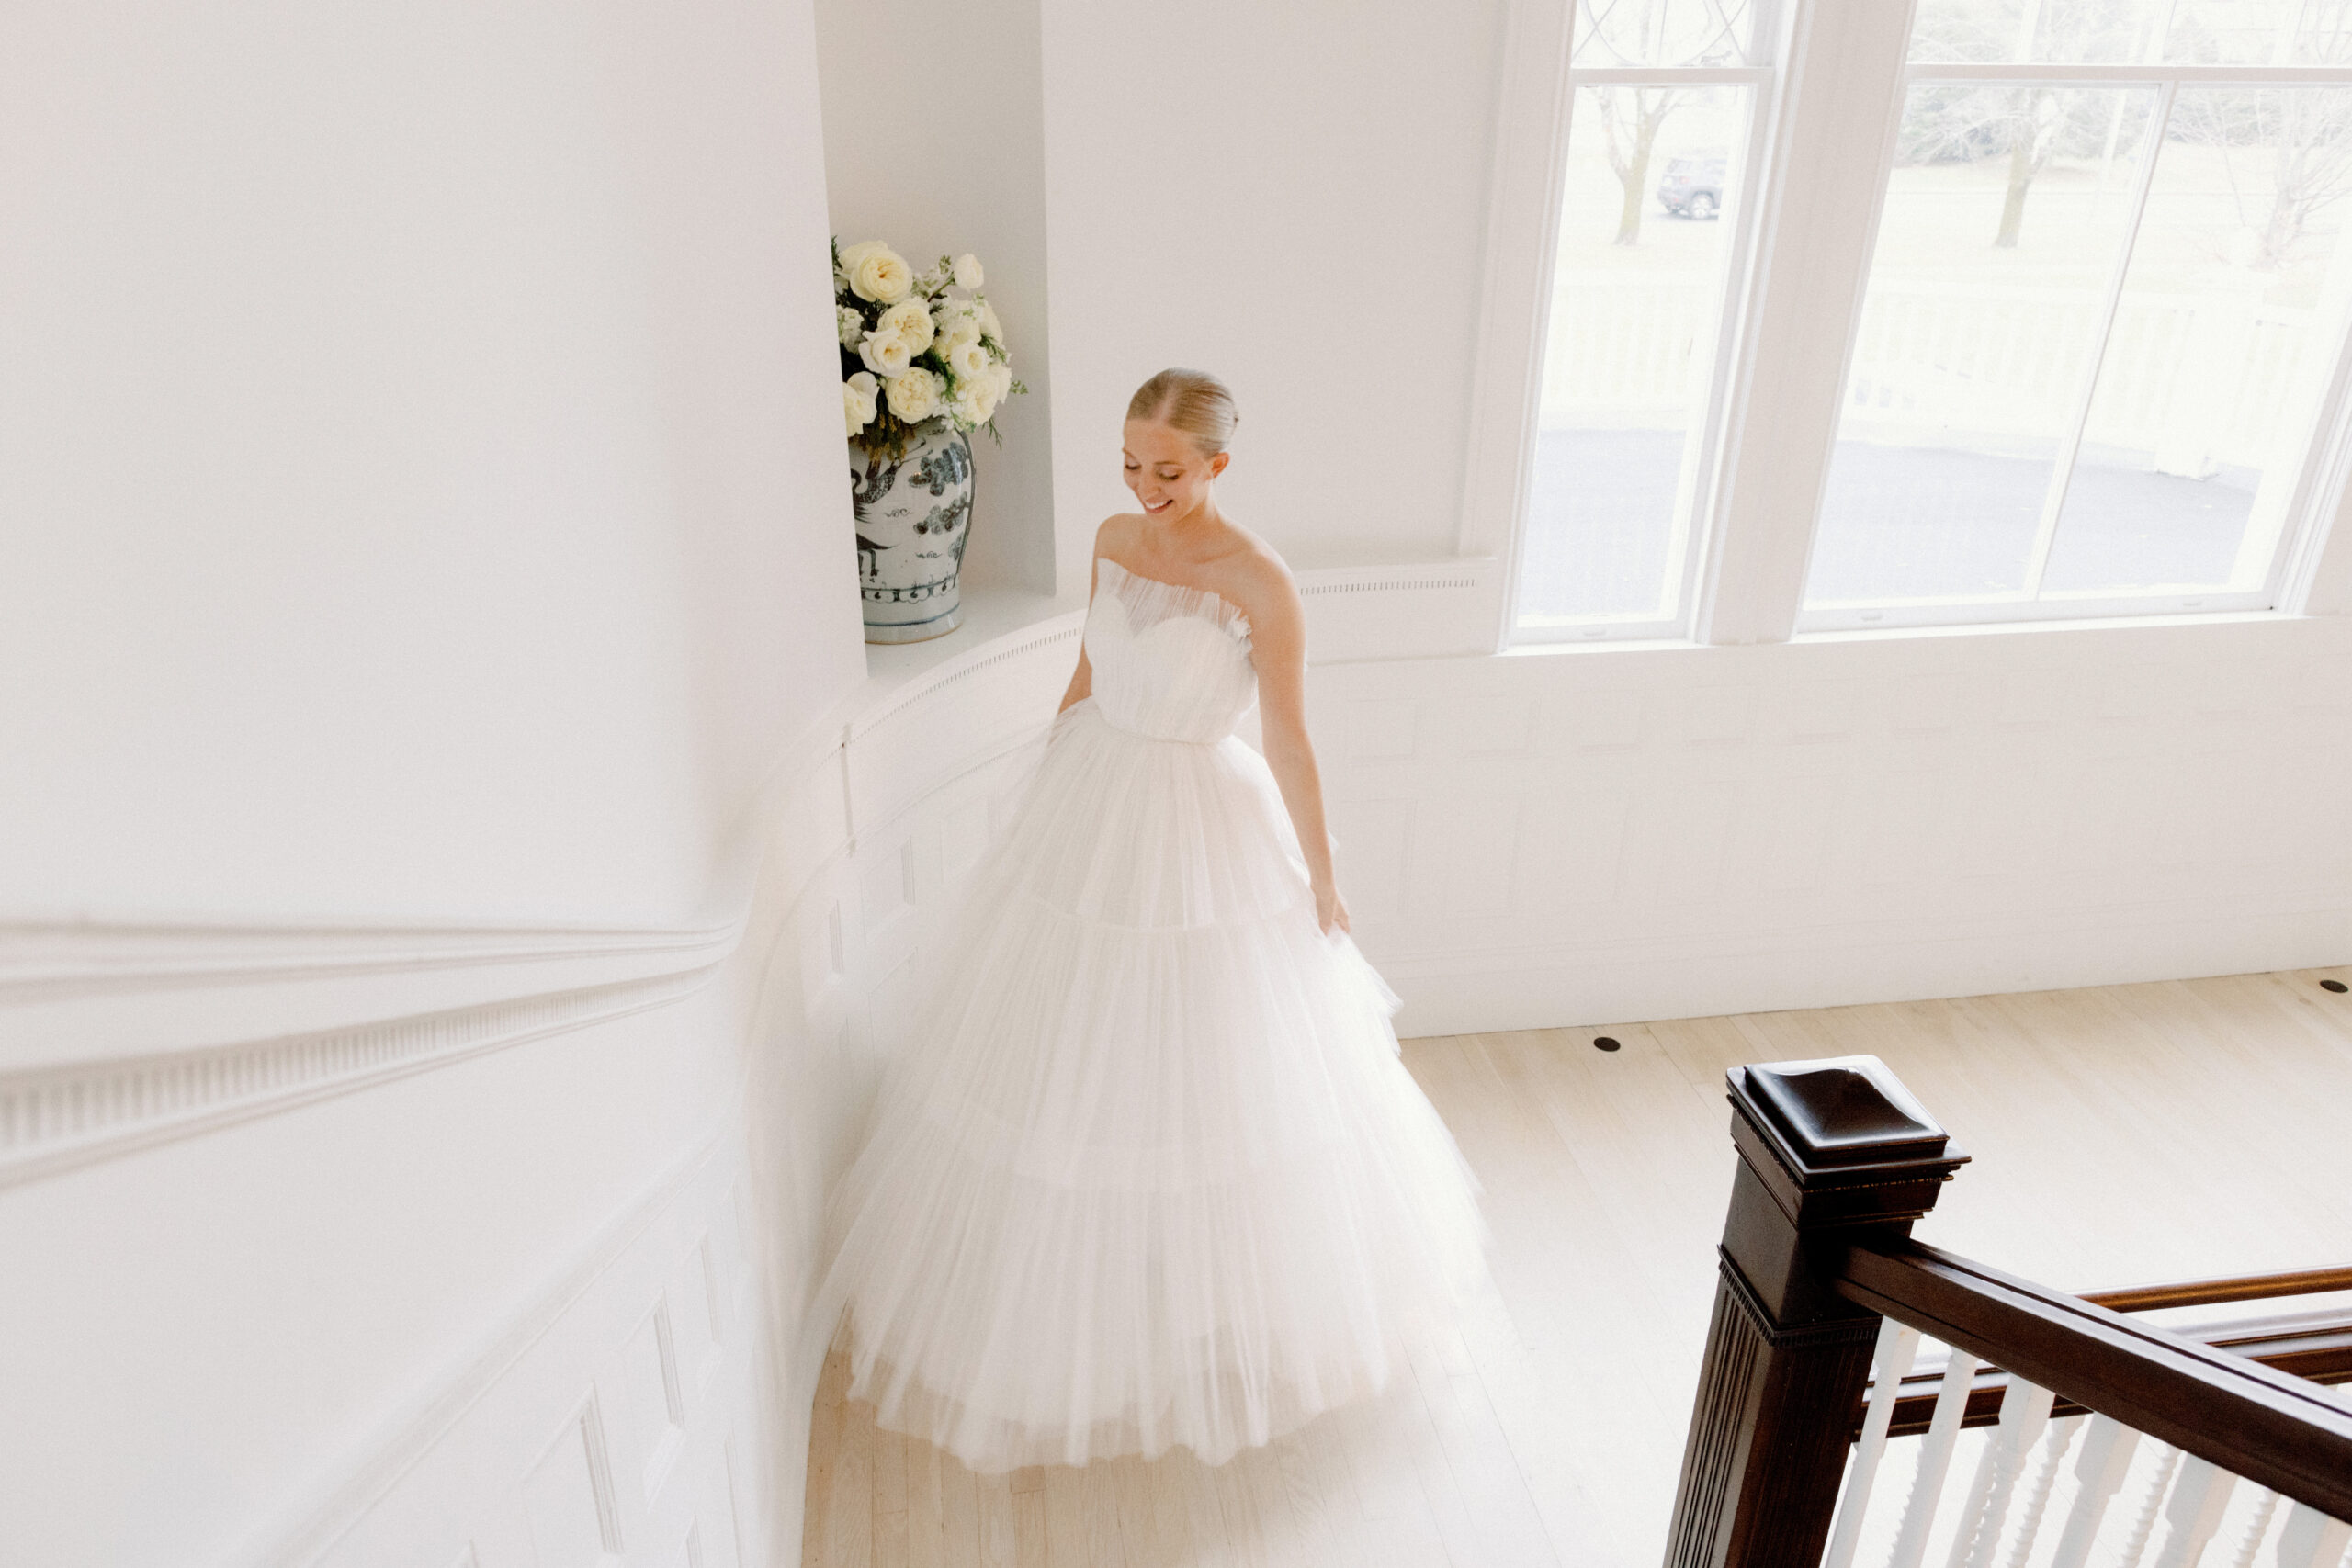 Editorial Photo of the bride, wearing her beautiful dress. Wedding Trends image by Jenny Fu Studio